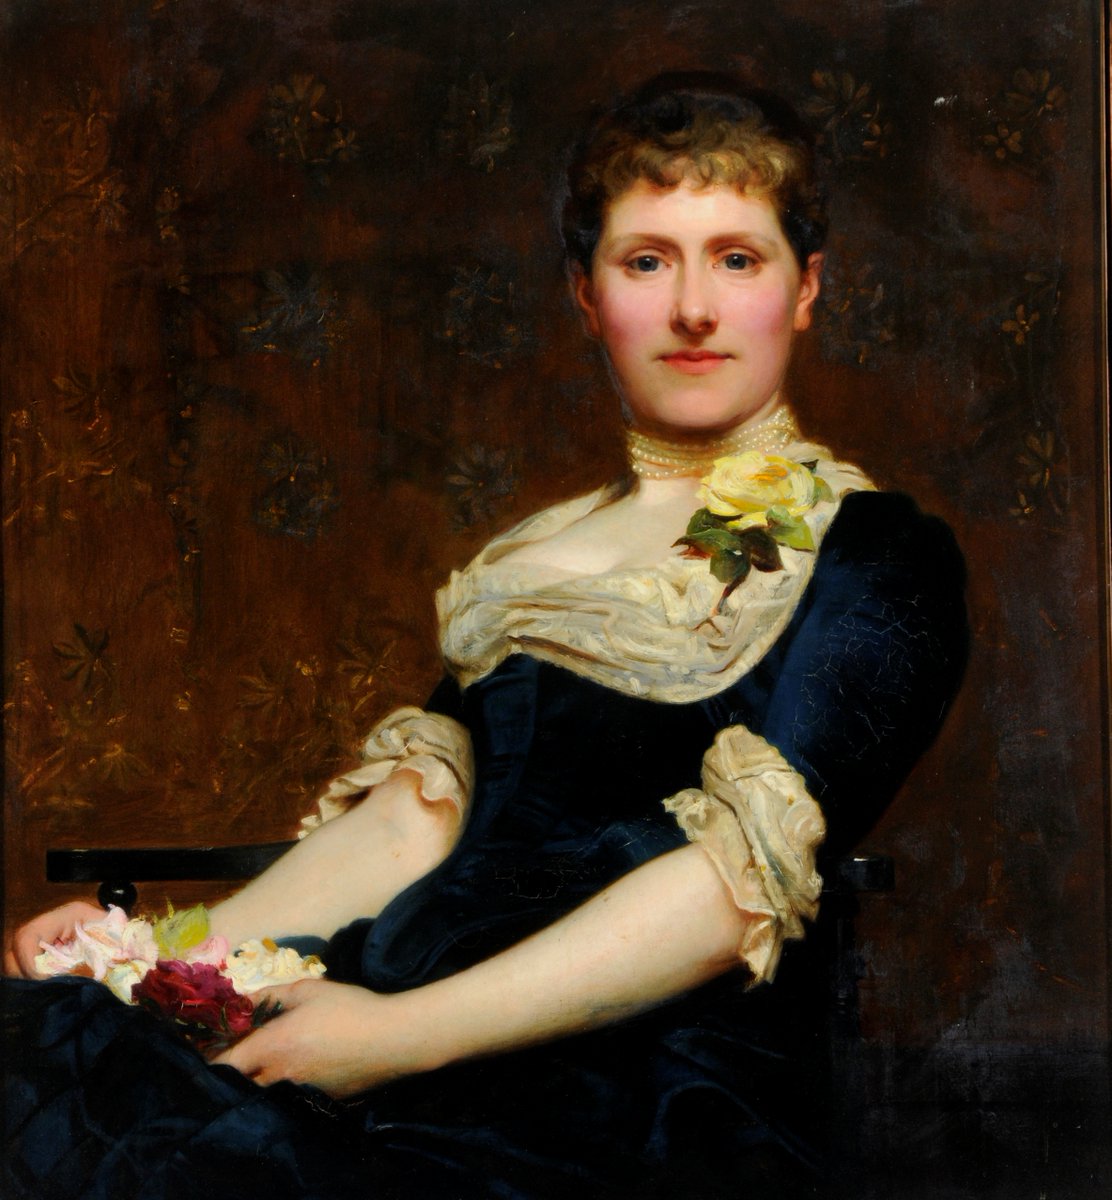 Beverley Art Gallery opened to the public in 1910, the brainchild of local businessman John Edward Champney (1846–1929). But did you know his wife Margaret opened the door to the art world for him? Mrs Champney (1846–1923), 1882 by Philip Hermogenes Calderon #beverleyartgallery